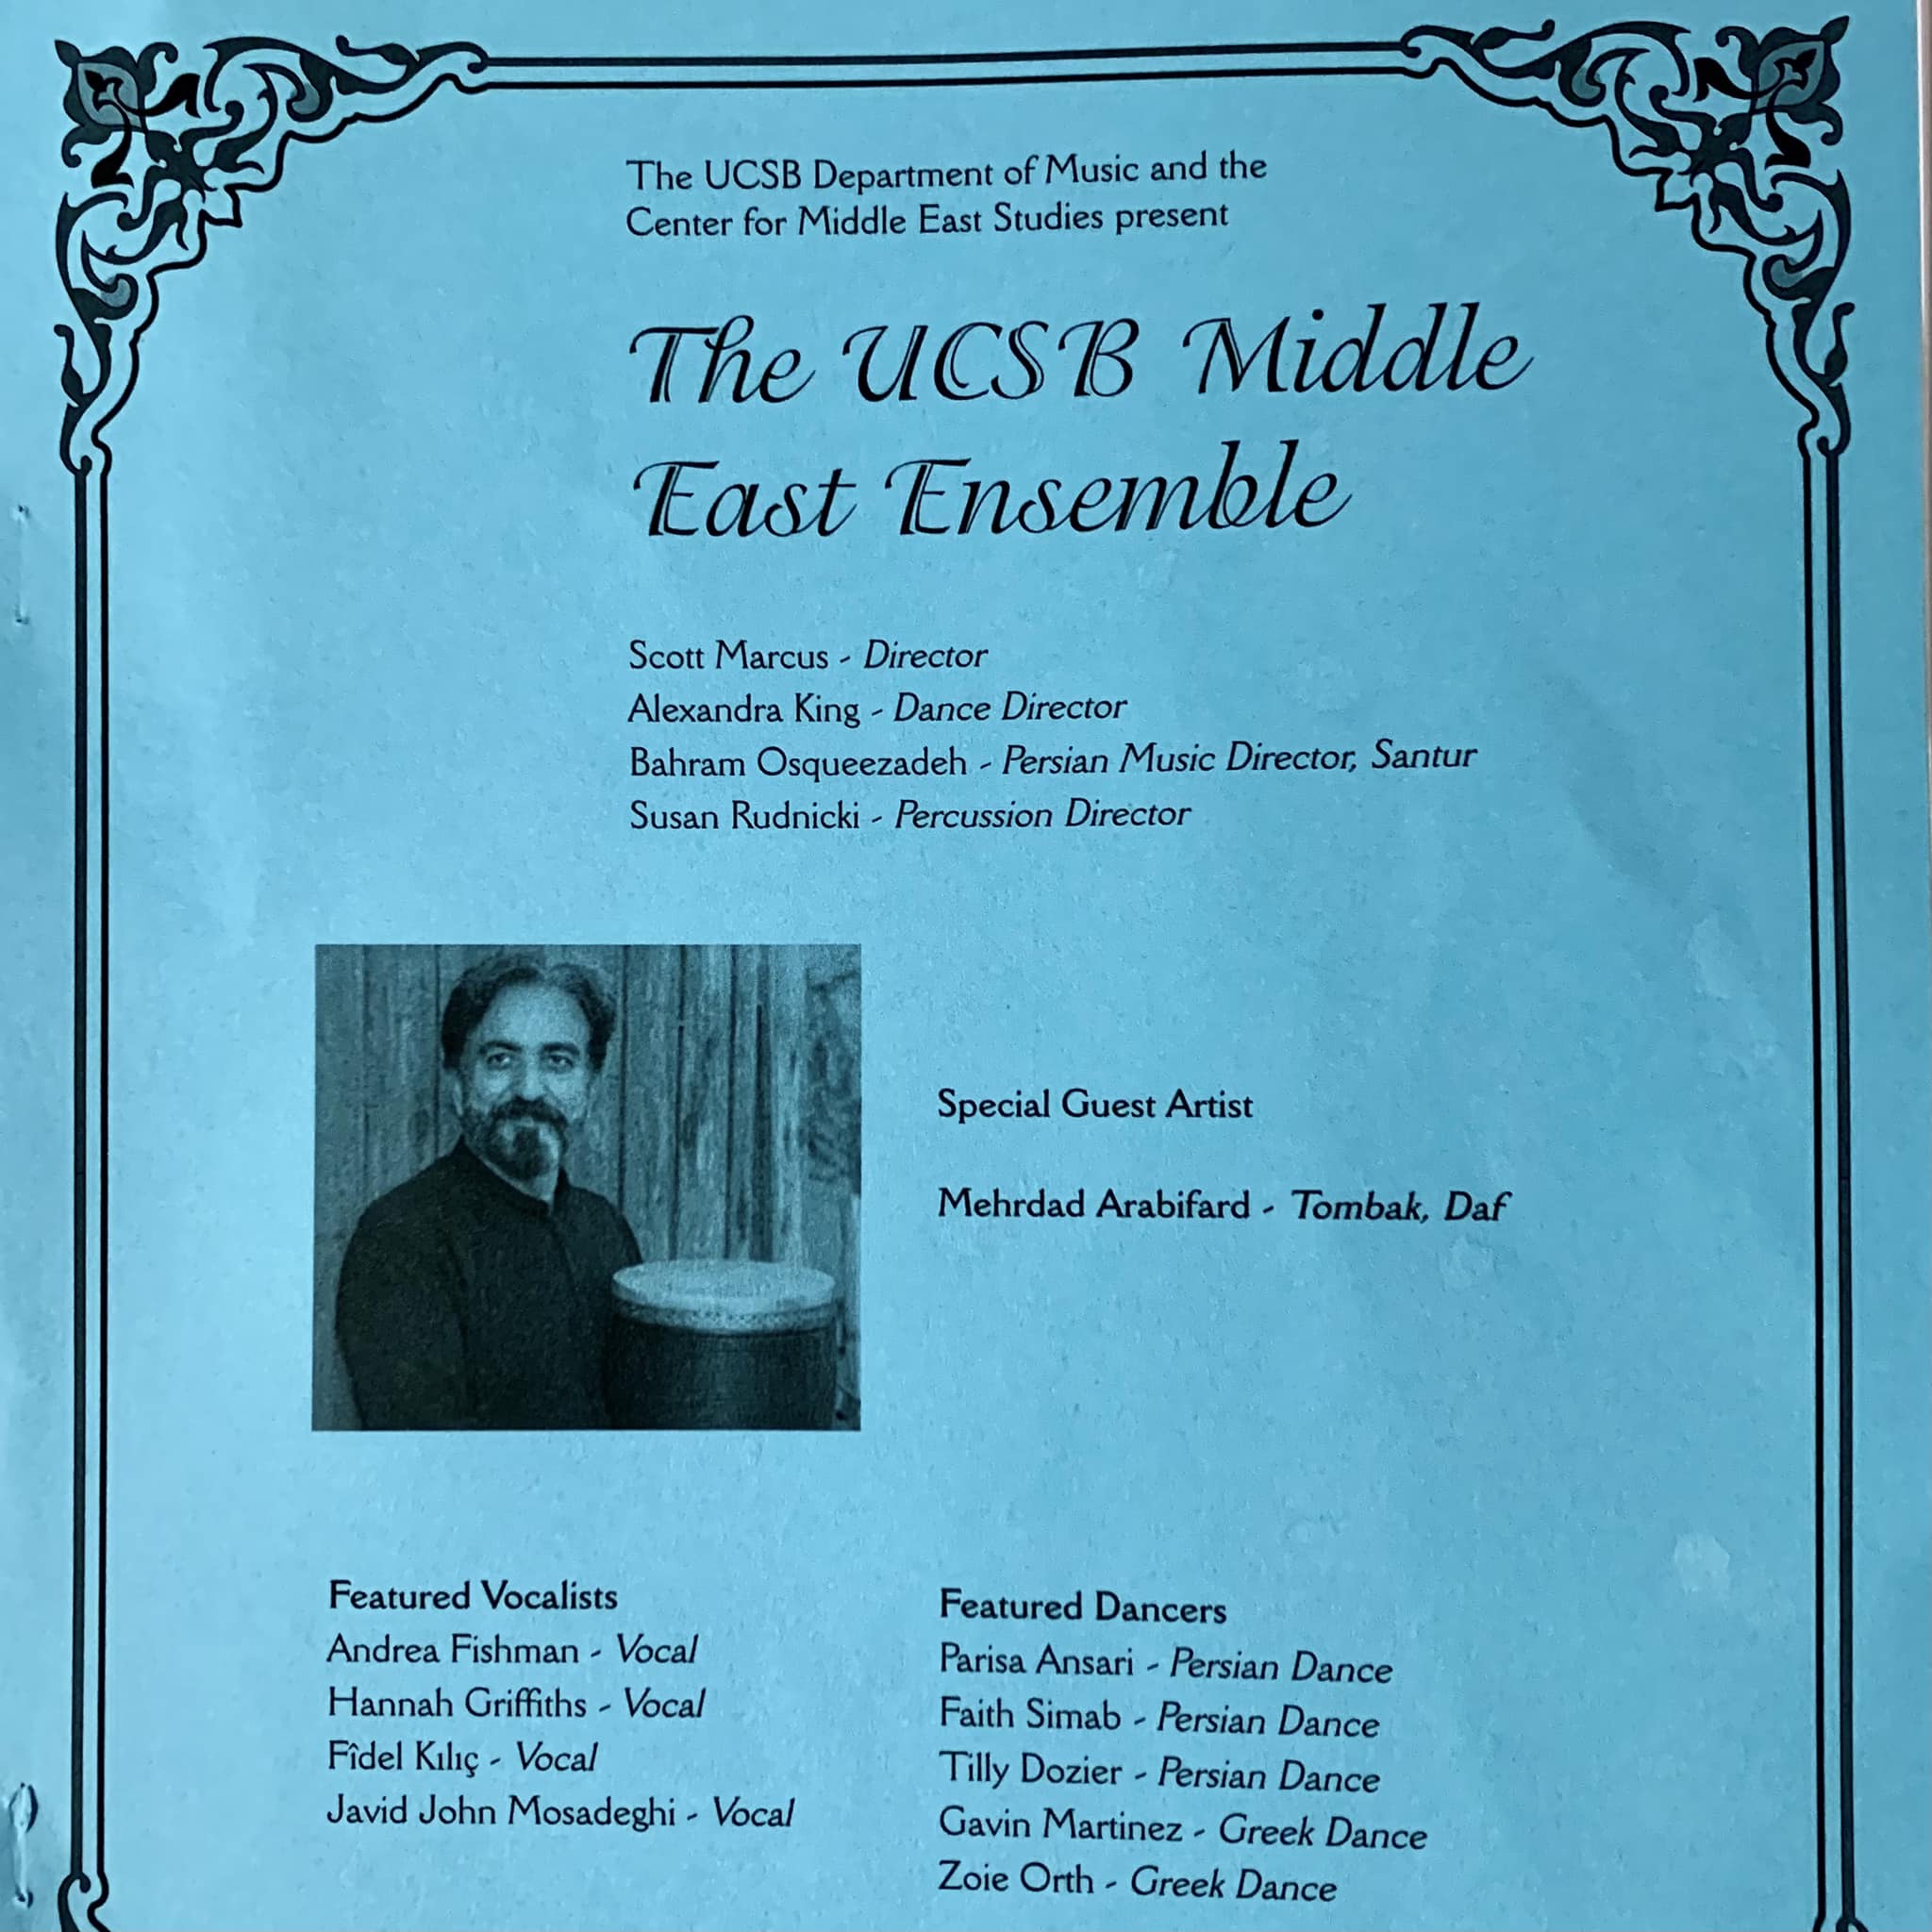 Spring concert of UCSB's Middle East Ensemble at Lotte Lehman Concert Hall: Cover of the program booklet